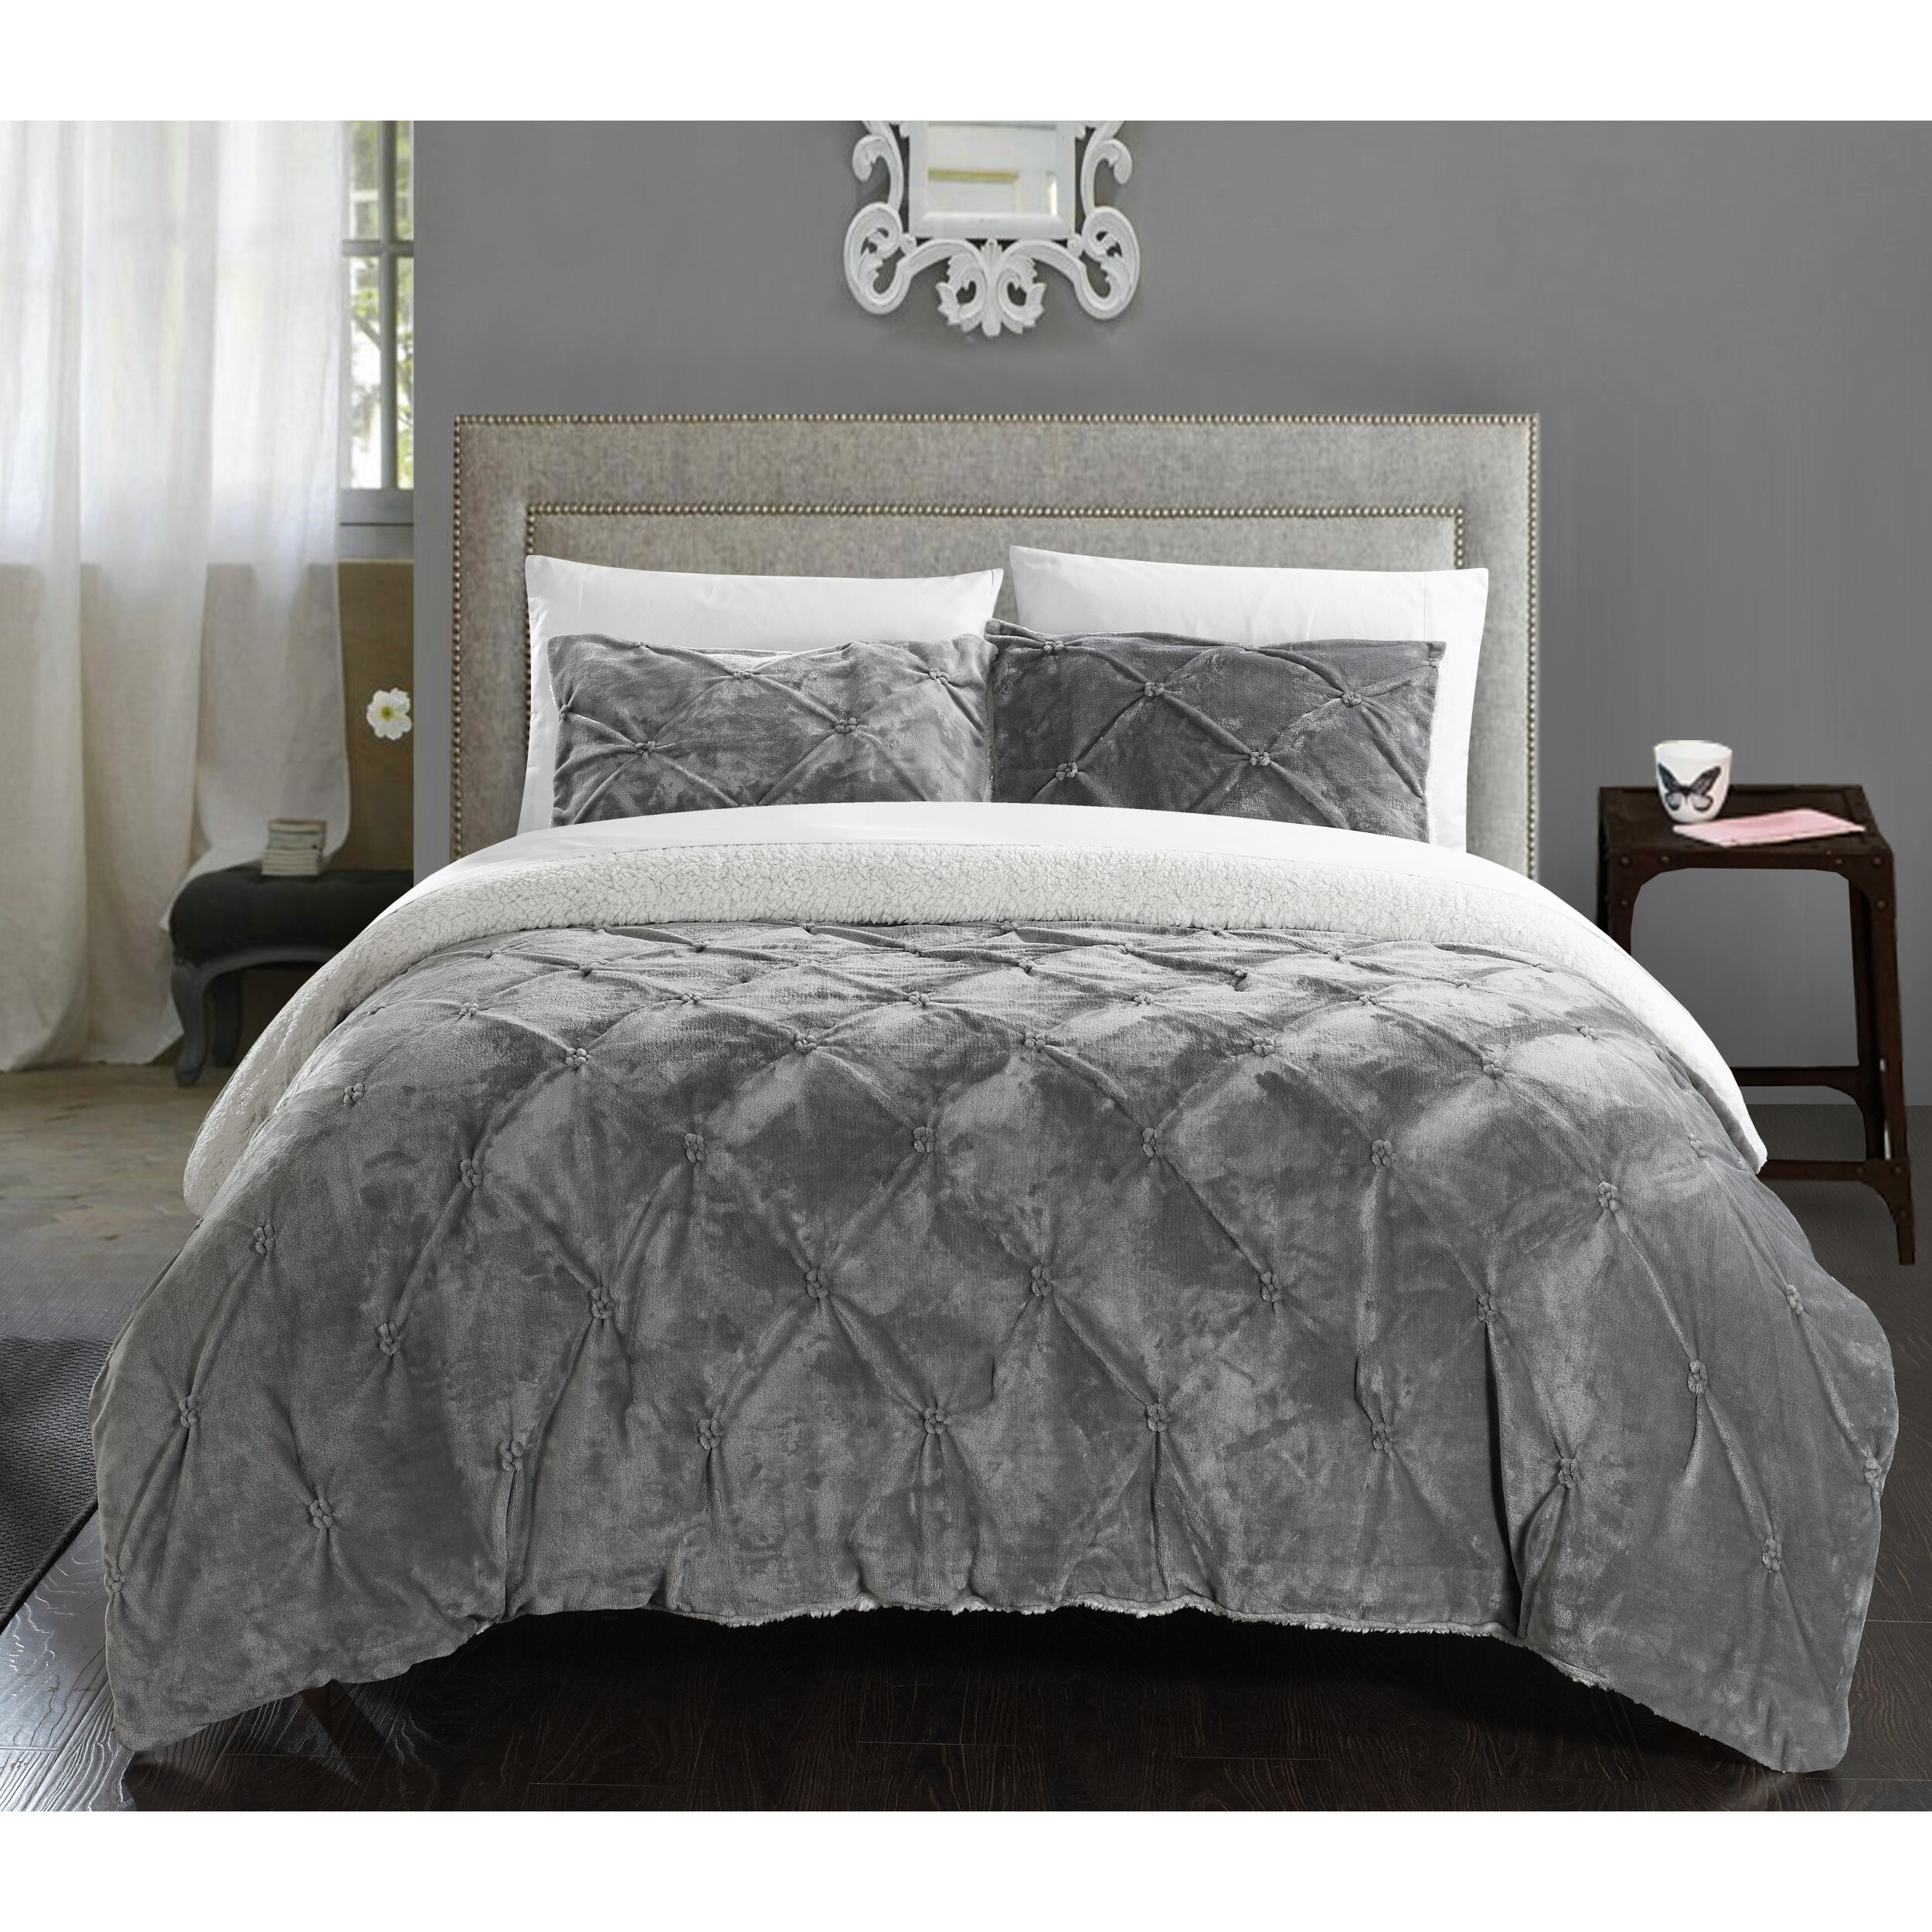 5 Piece Comfort Cozy Cavoy Comforter Bedding Set Tufted Pattern Gray King Size 